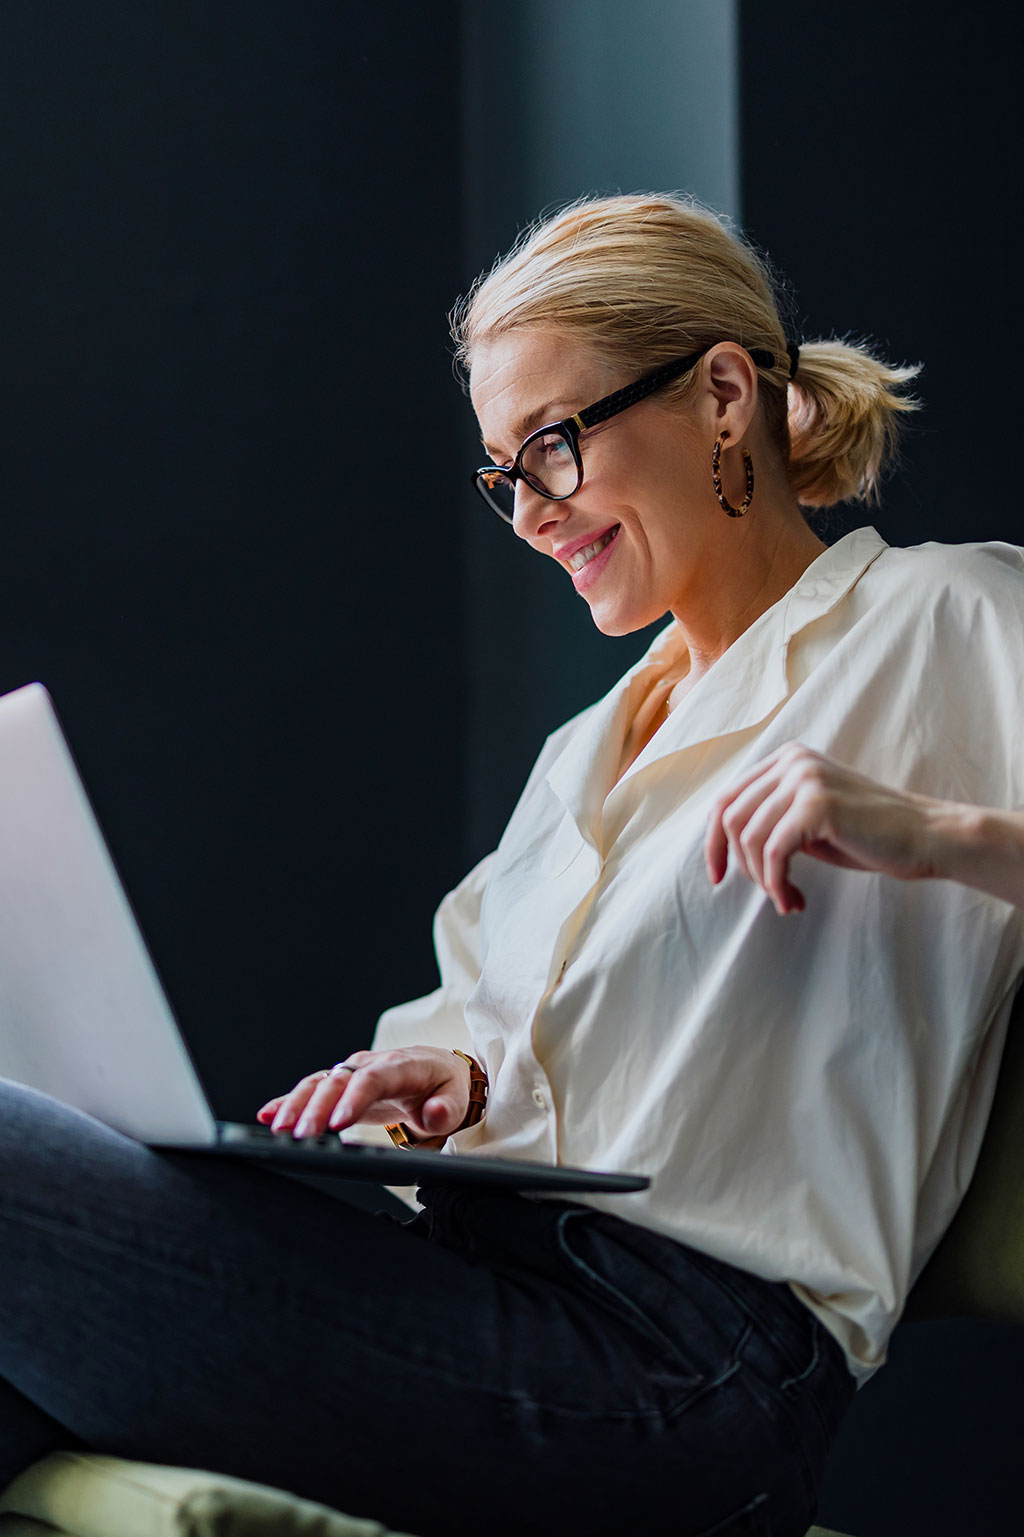 Business woman sitting down happy looking at computer